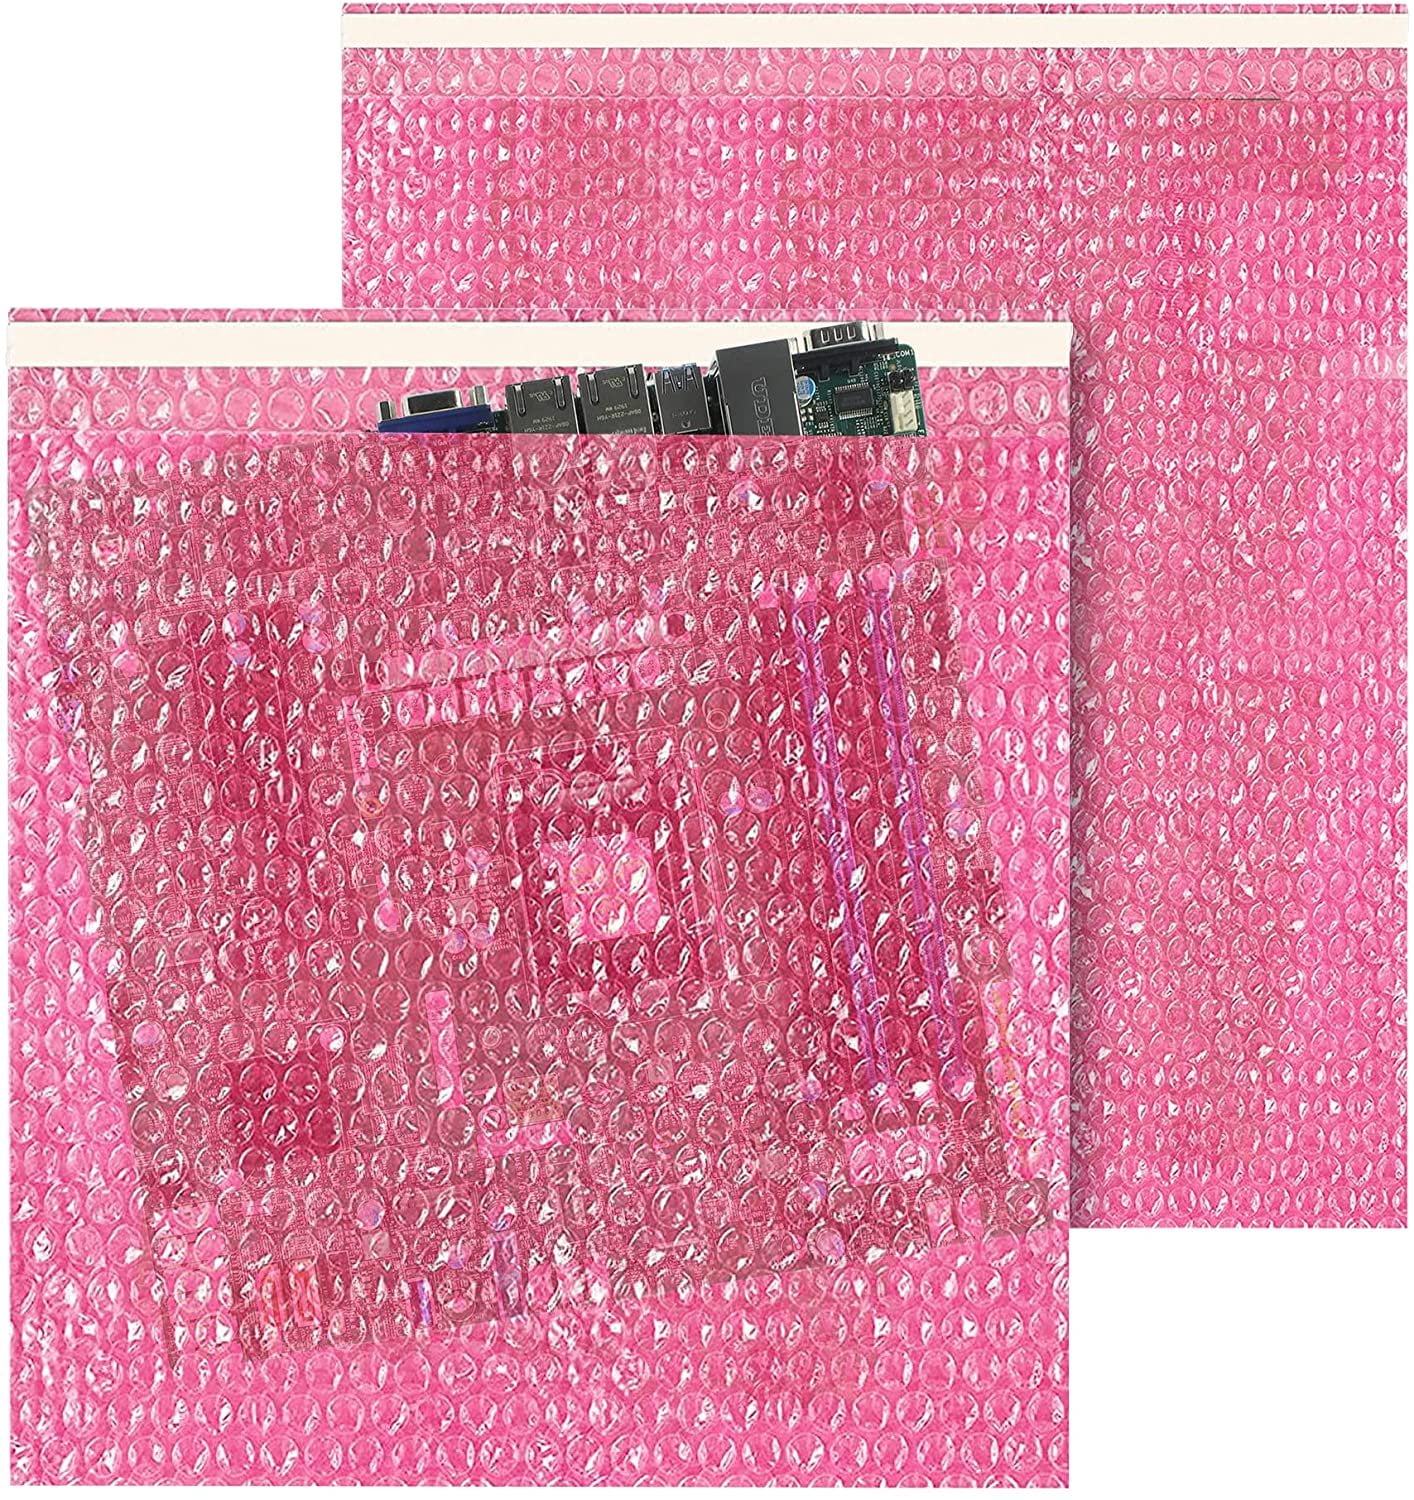 Reusable for Sensitive Electronic Components Anti Static Bubble Bags XX-Large Qty 10, Pink Resealable Static Shielding Bag 